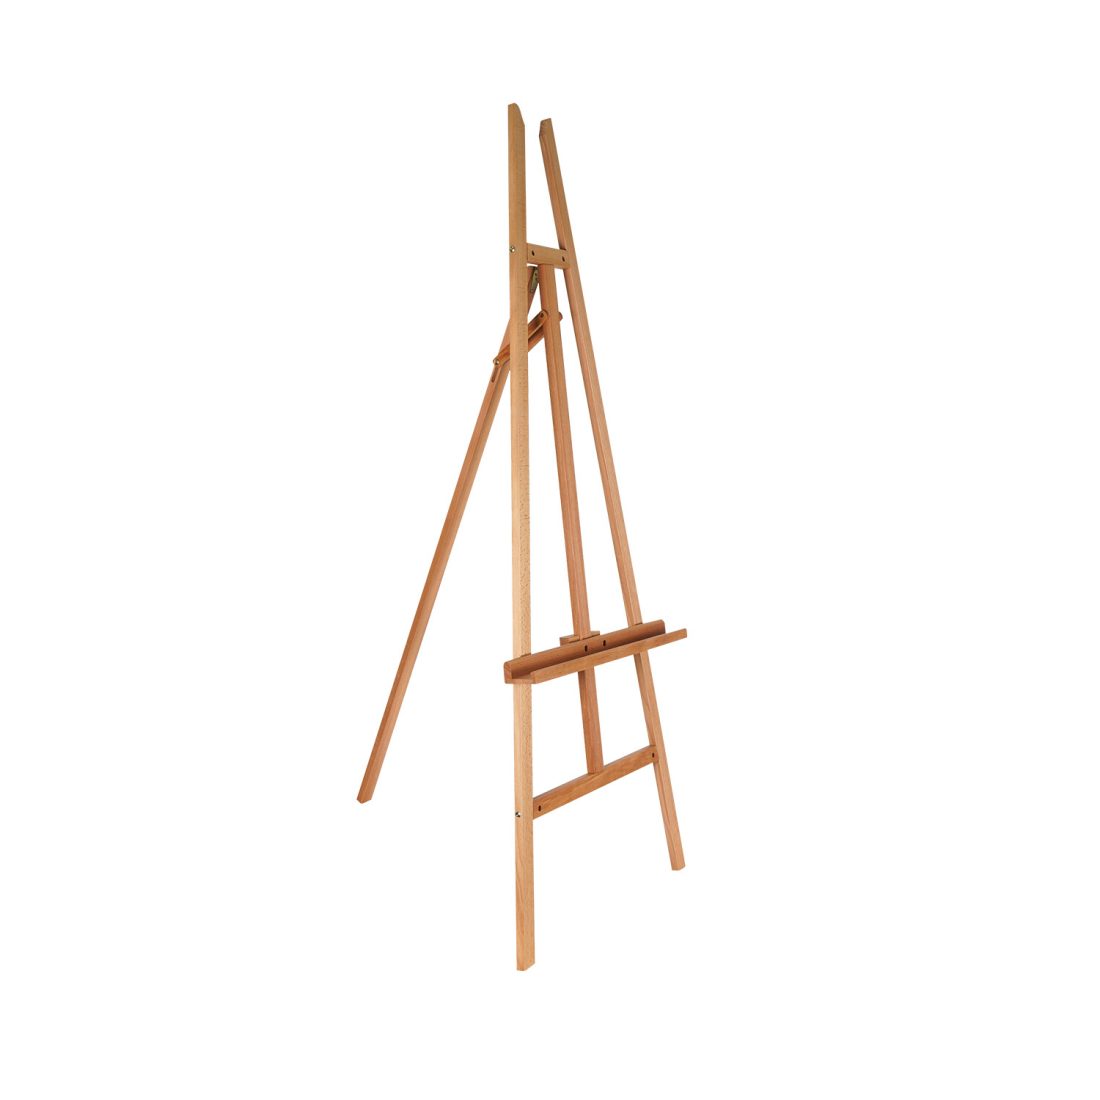 RRFTOK Artist Easel Stand, Metal Material Tripod Adjustable Easel for  Painting Canvases Height from 17 to 66 Inch,Carry Bag for Table-Top/Floor